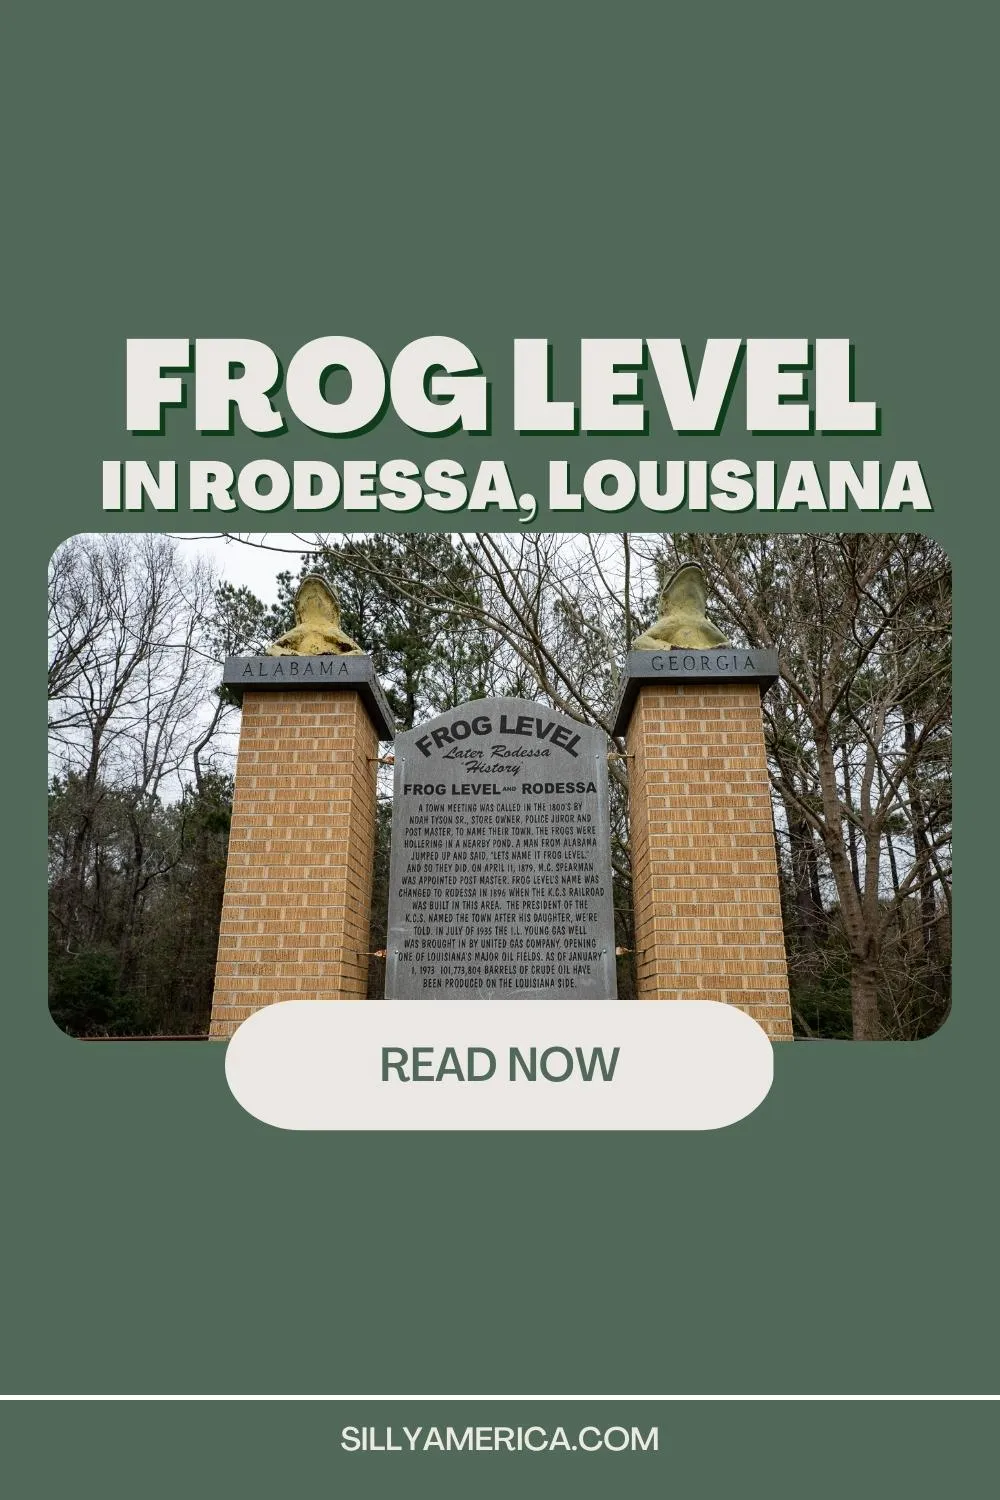 If you're road tripping through Louisiana hop on over to this roadside attraction - it is TOAD-ally worth it! Frog Level in Rodessa, Louisiana is a RIBBITing historical marker that is like no other. Frog level is a weird roadside attraction in Louisiana celebrating the town's original name and inhabitants.  #Louisiana #LouisianaRoadTrip #LouisianaRoadsideAttraction #RoadTrip #RoadsideAttraction